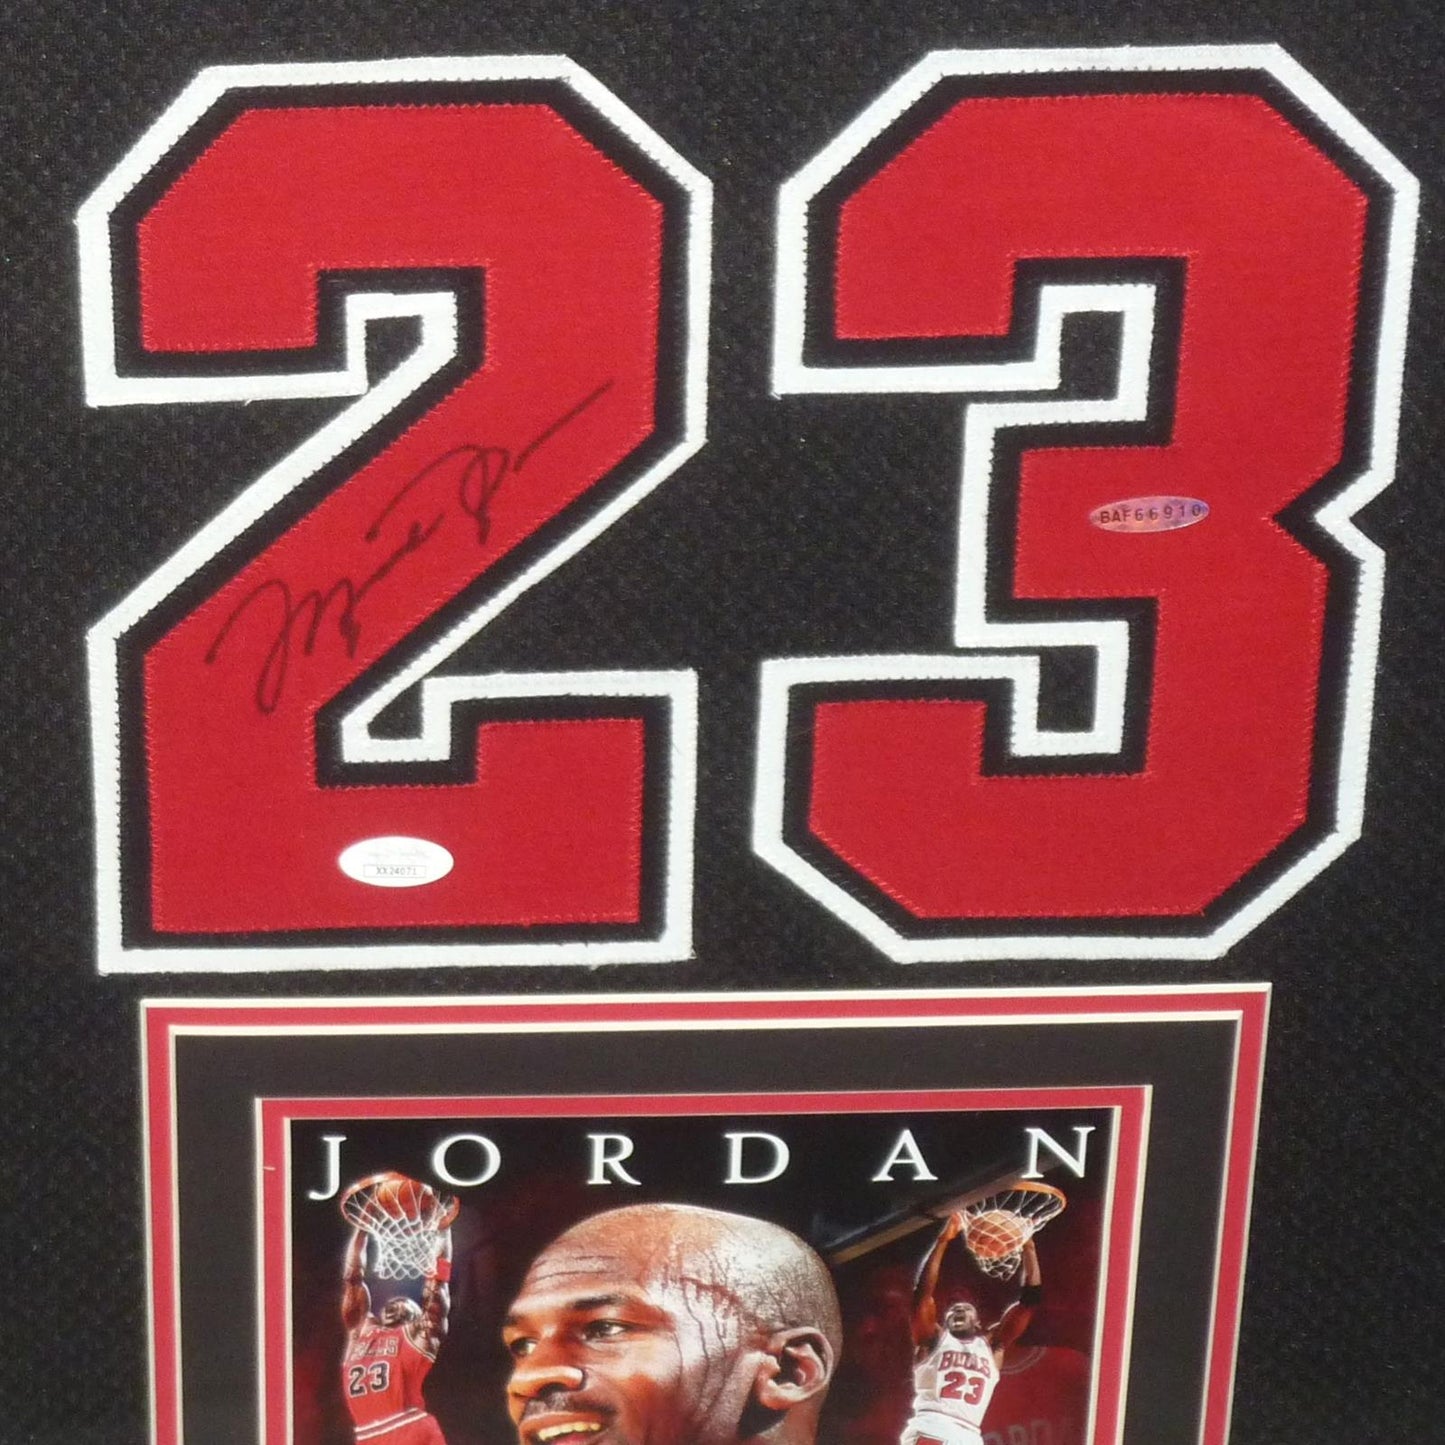 Michael Jordan Autographed Signed Jersey UDA for Sale in